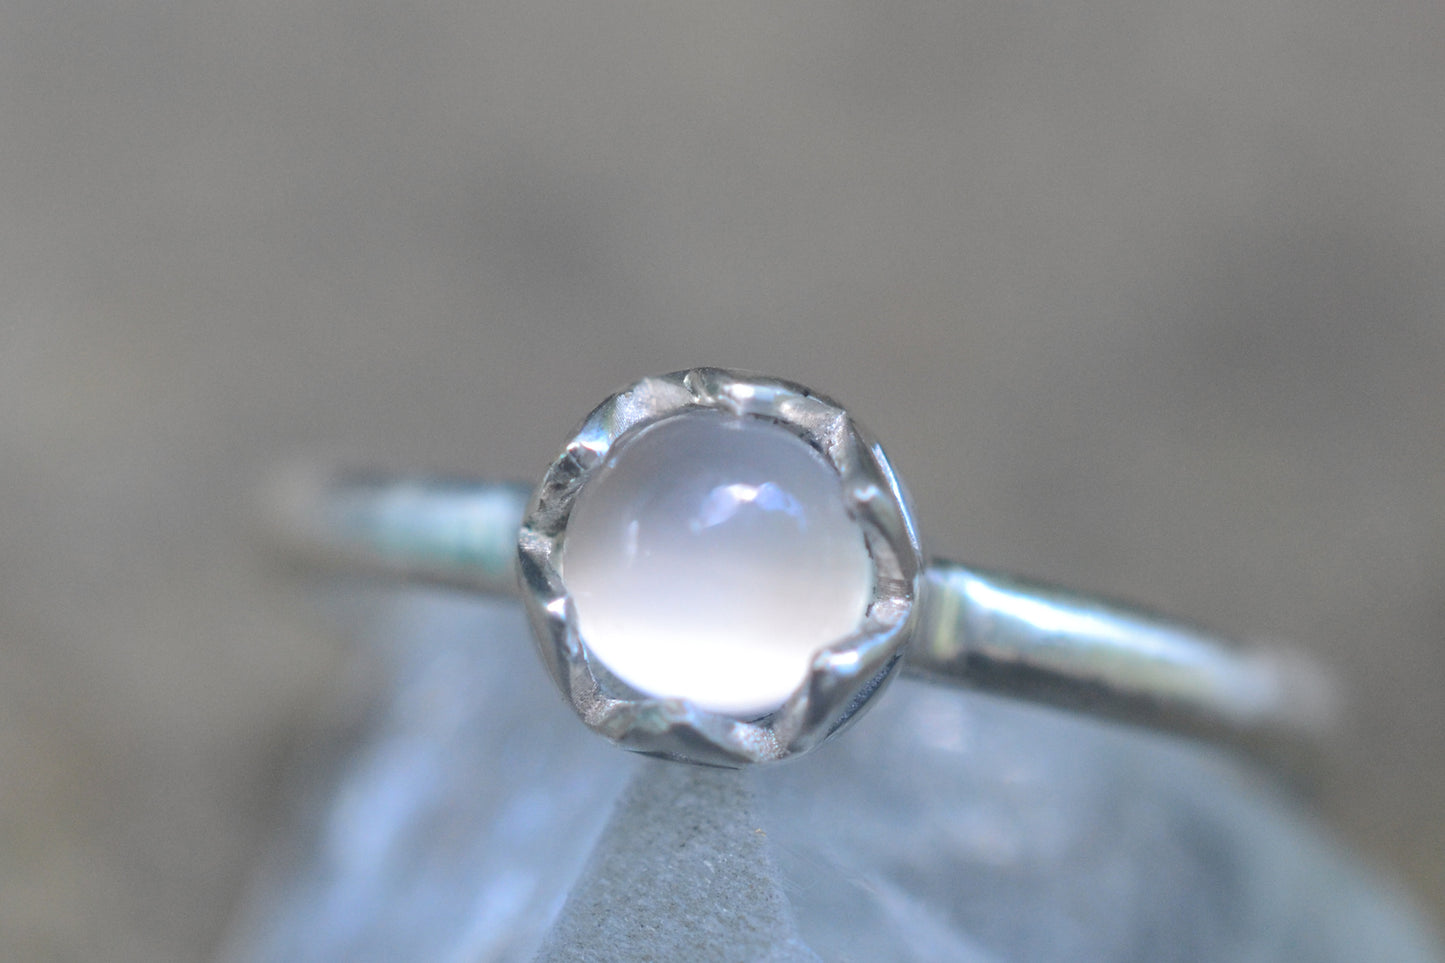 5mm Moonstone Cabochon Ring in 925 Silver